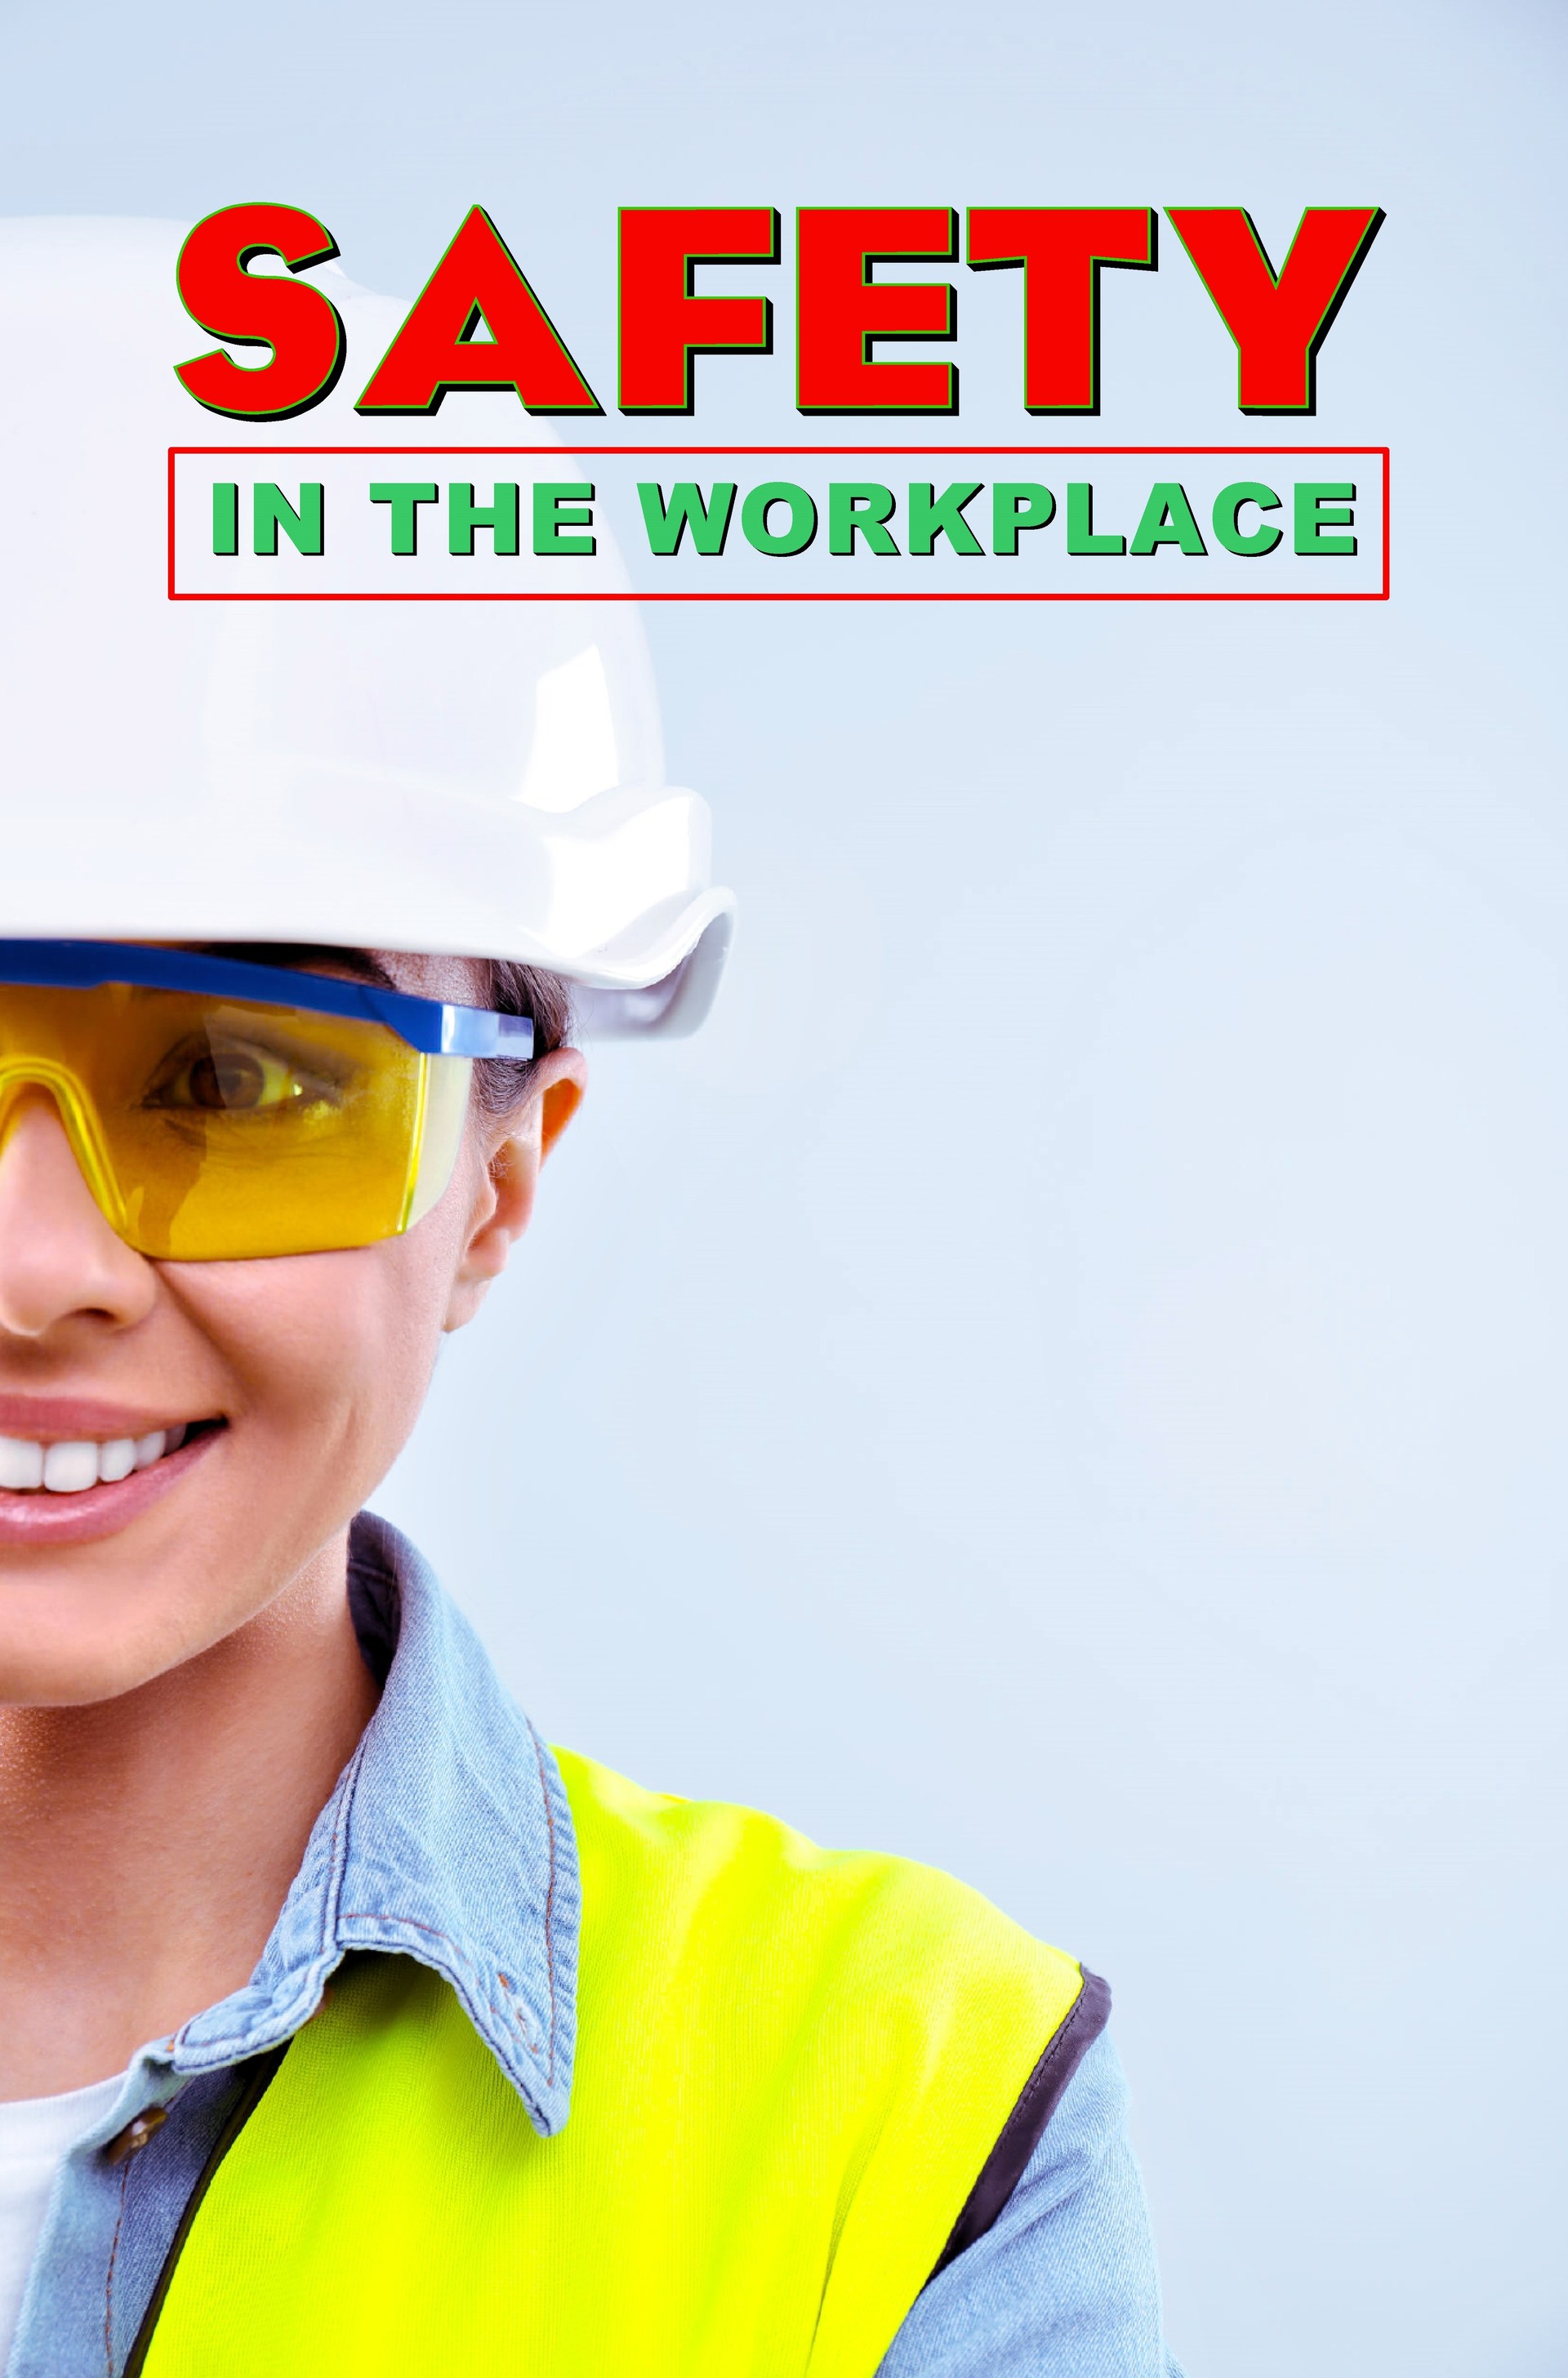 L7044 - Safety in the Workplace